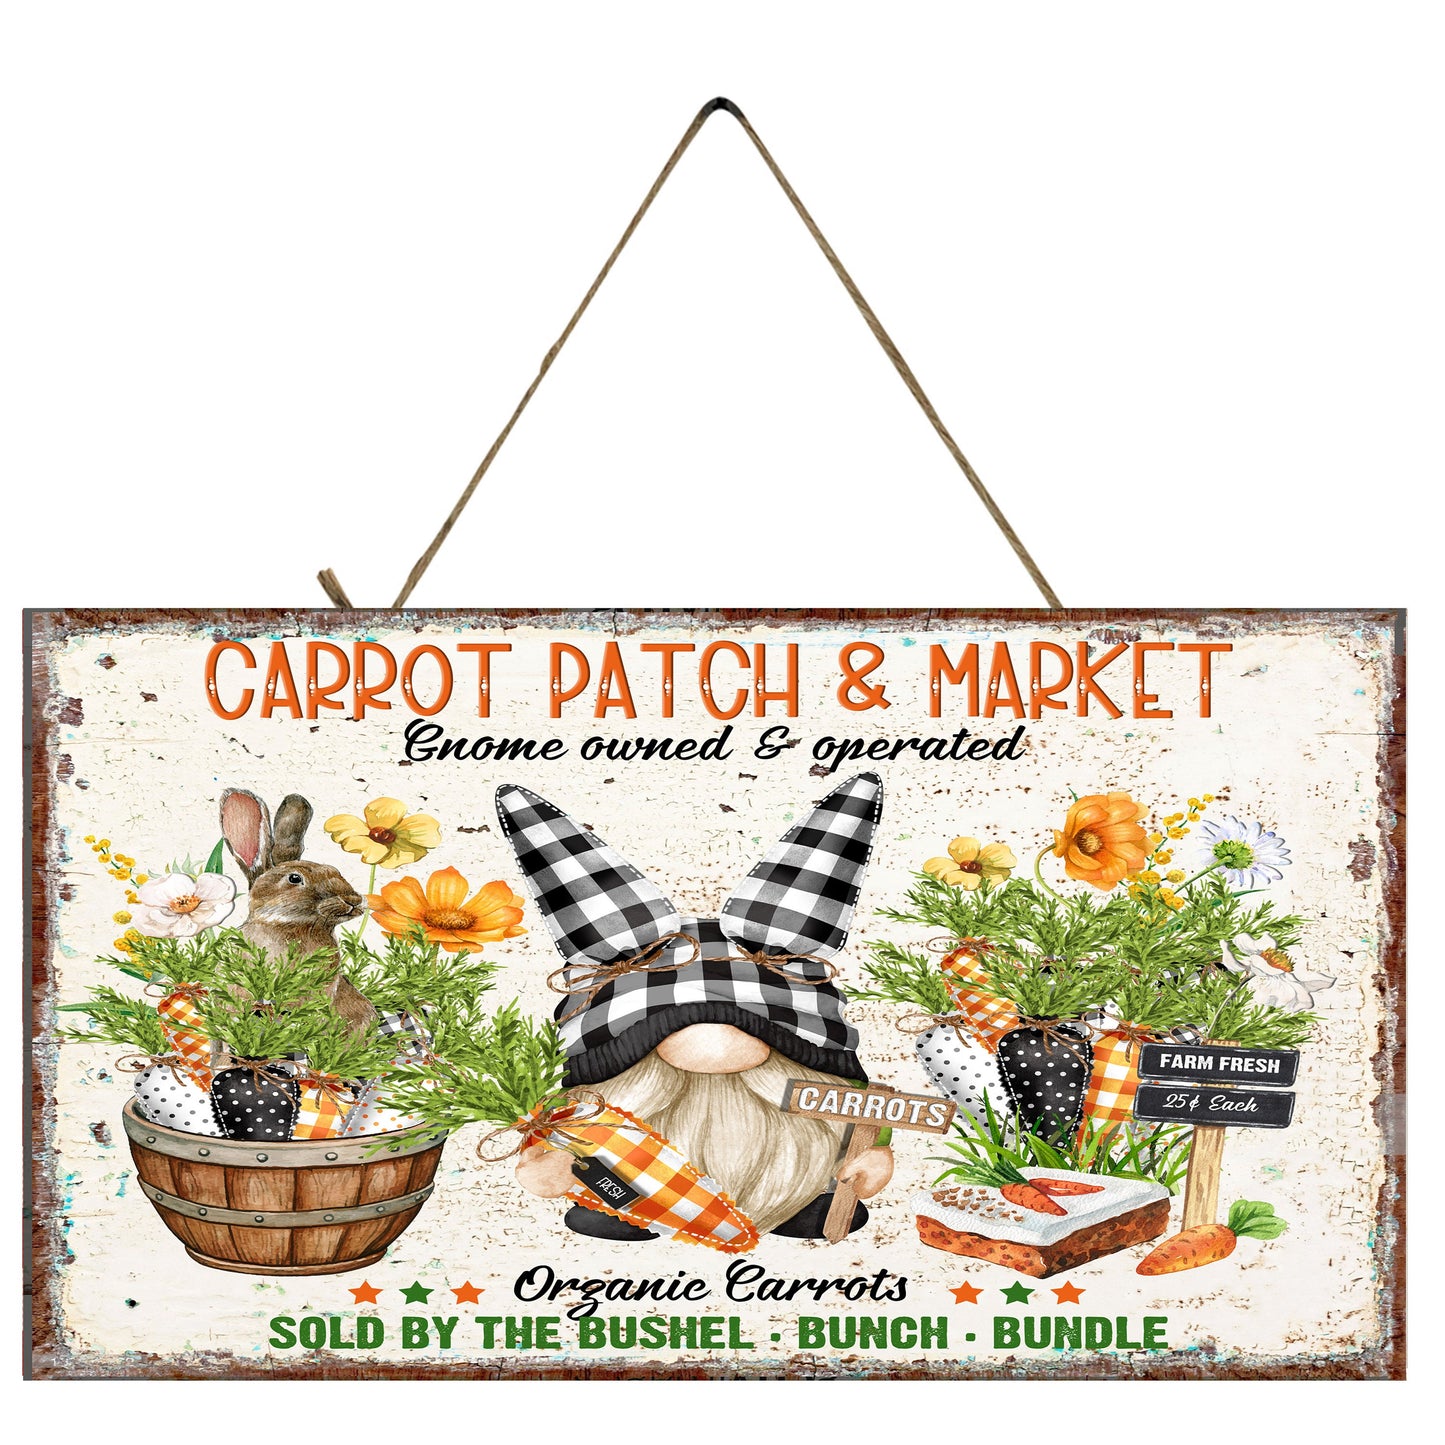 Carrot Patch and Market Printed Handmade Wood Sign